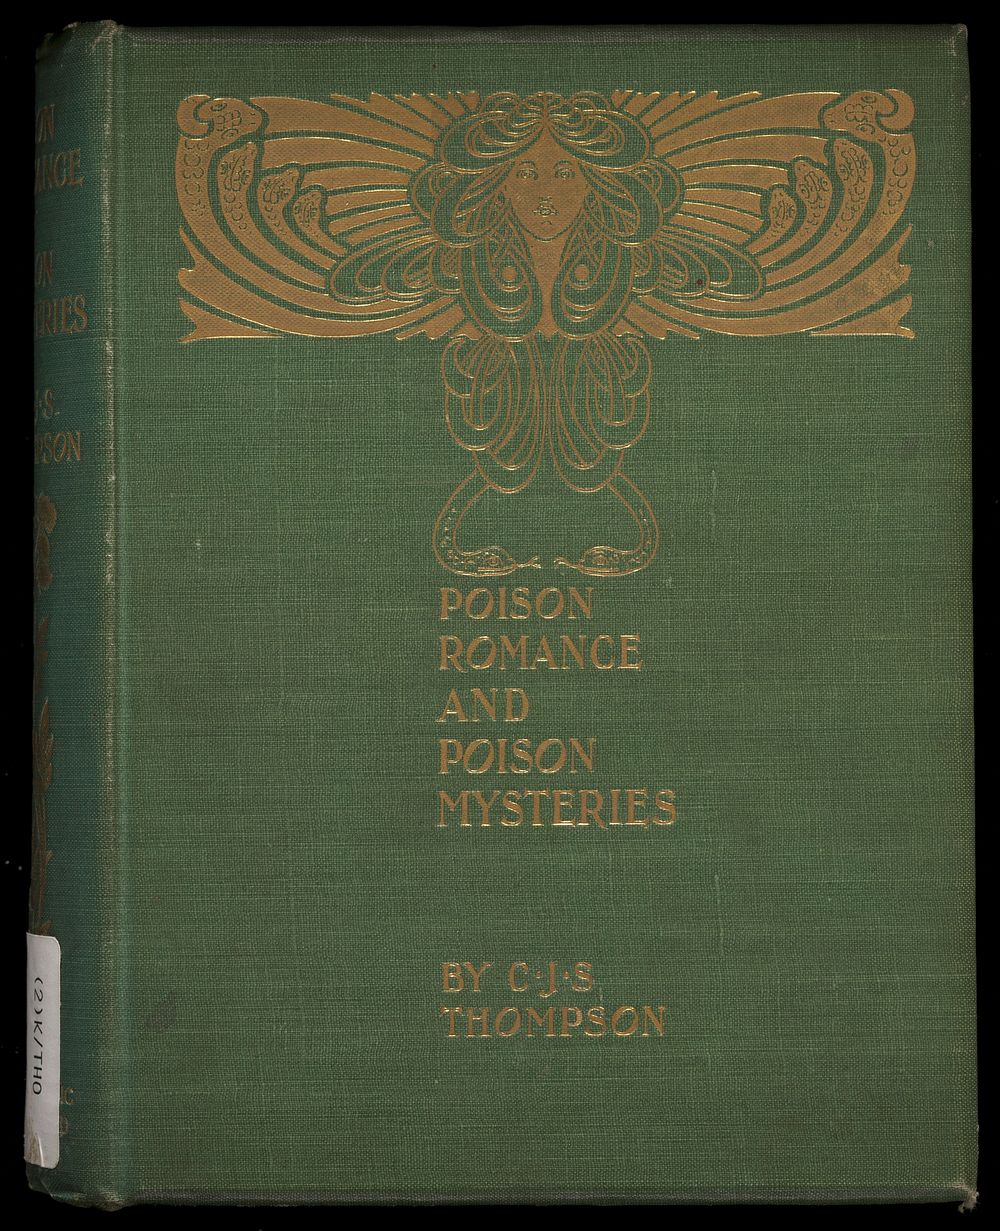 Poison romance and poison mysteries / by C.J.S. Thompson.